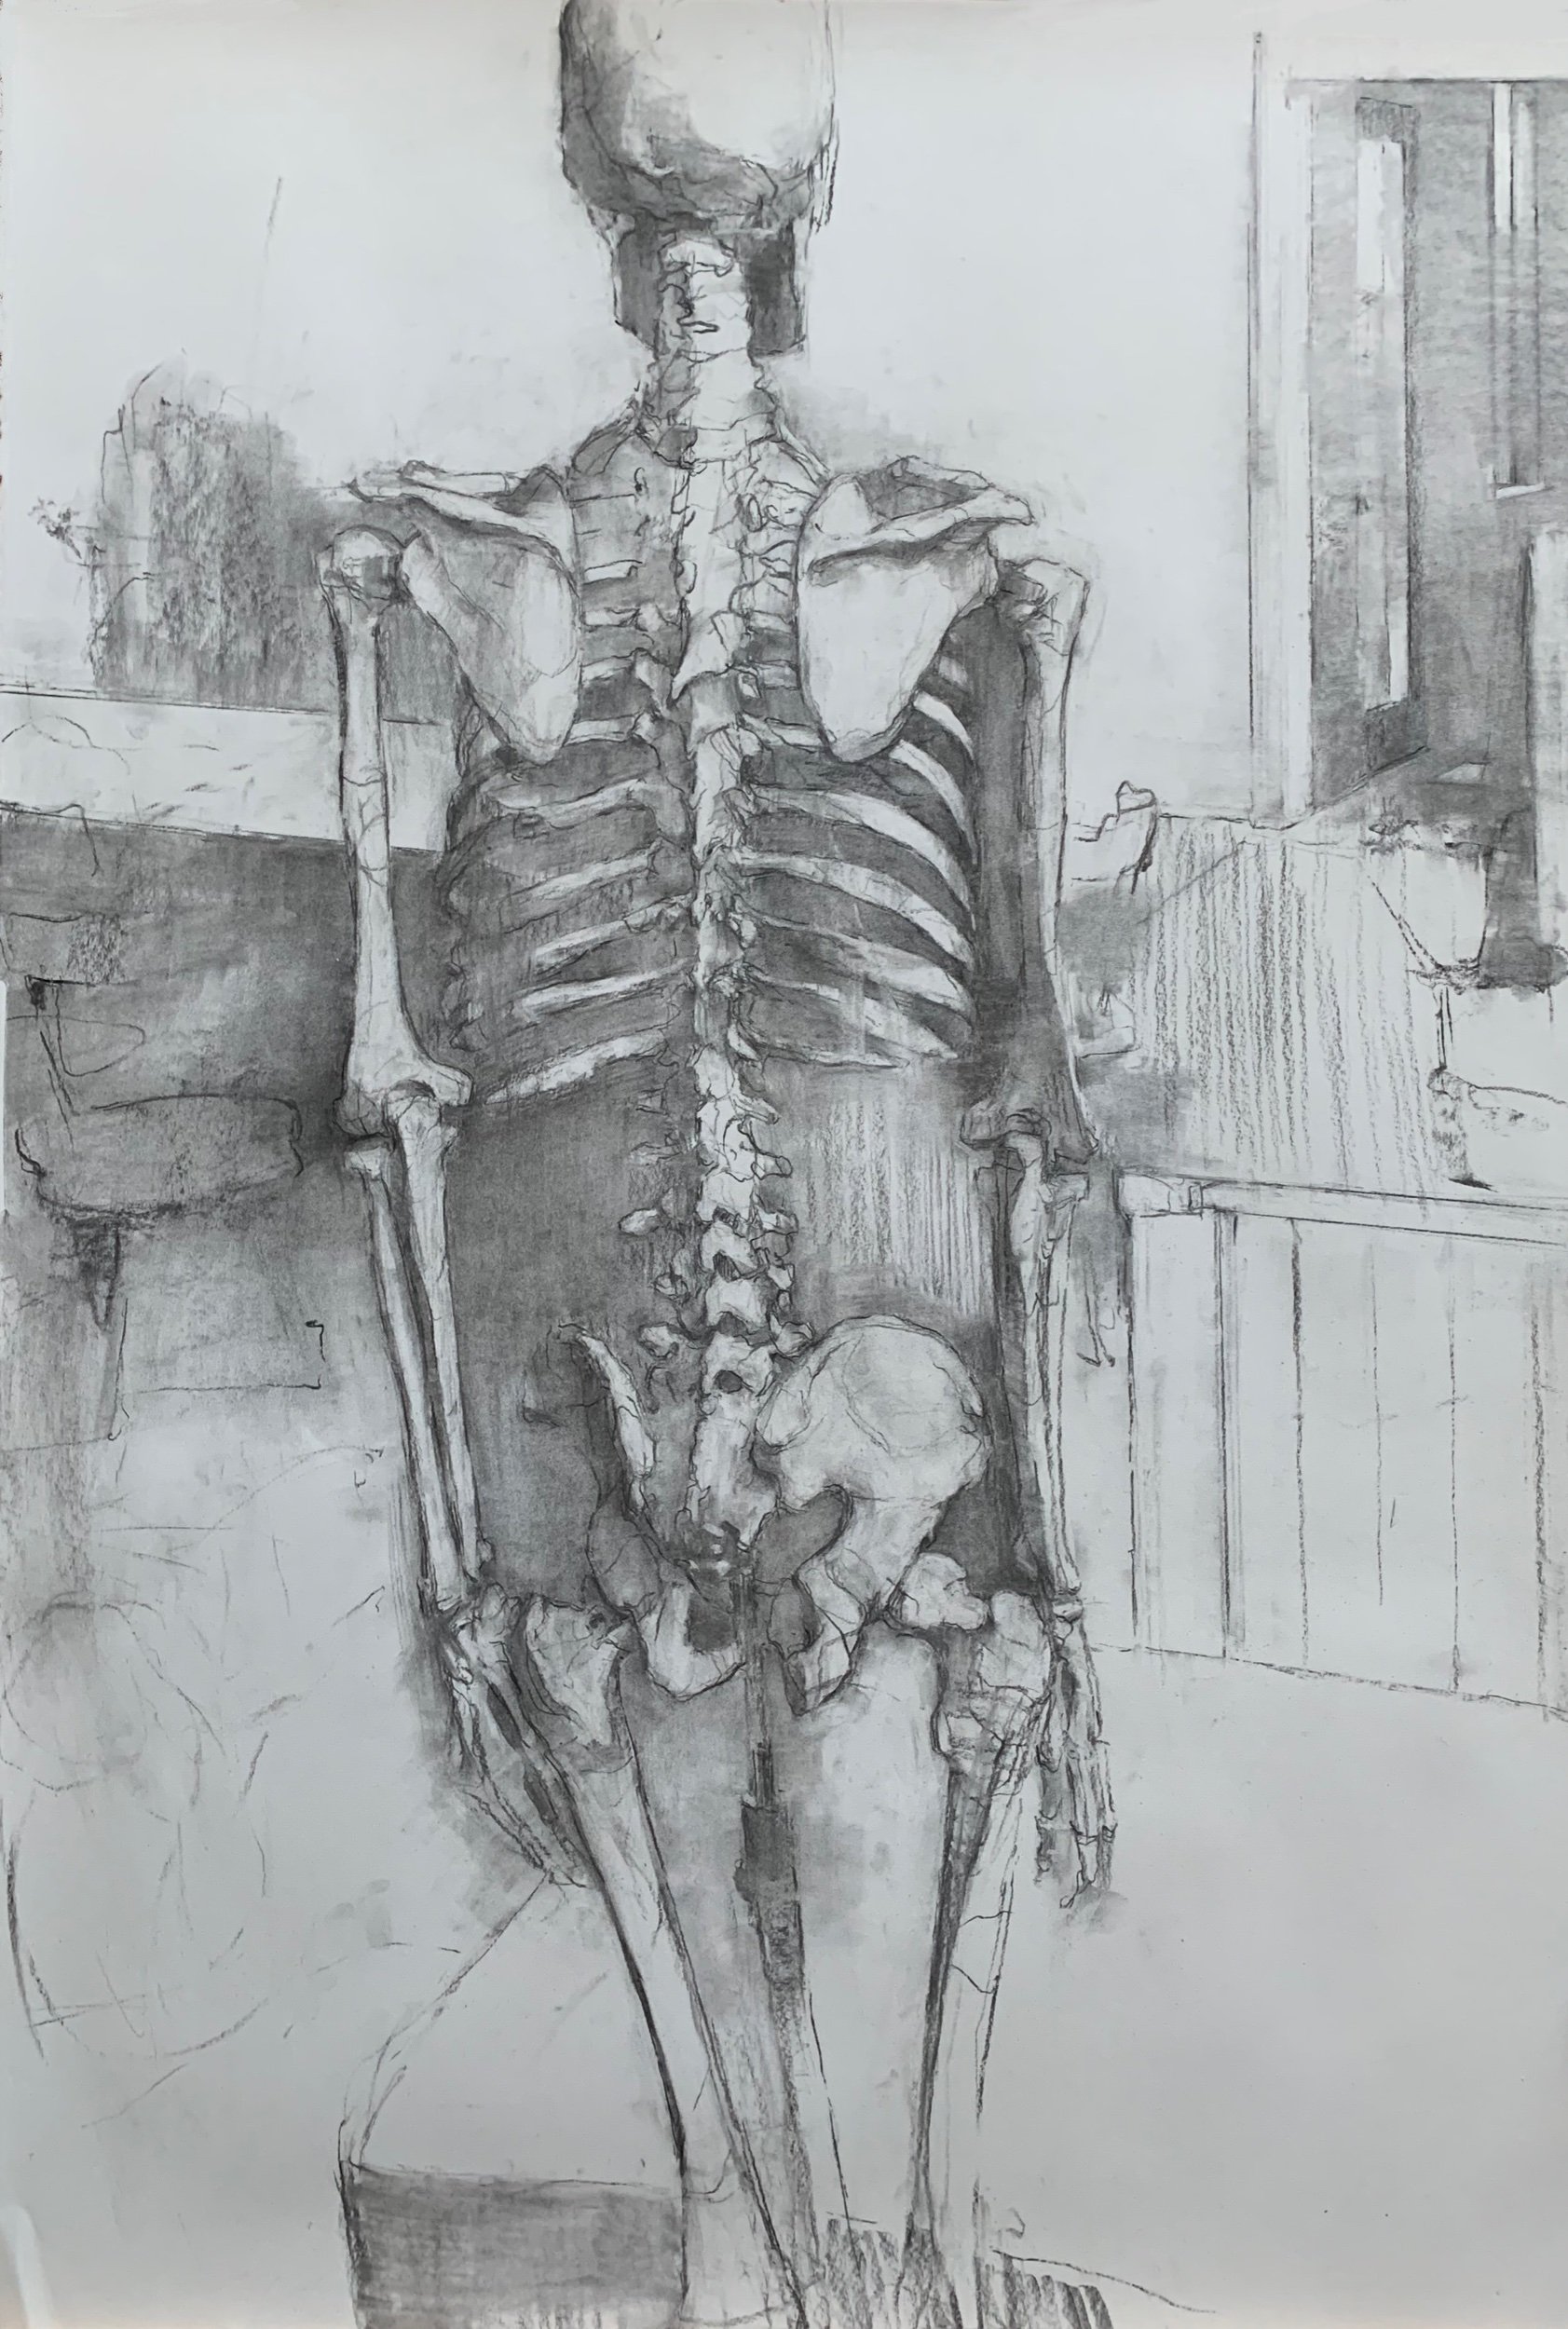   Skeleton 2 (in the Alabama studio)   2021  44” x 30”  Charcoal on paper   